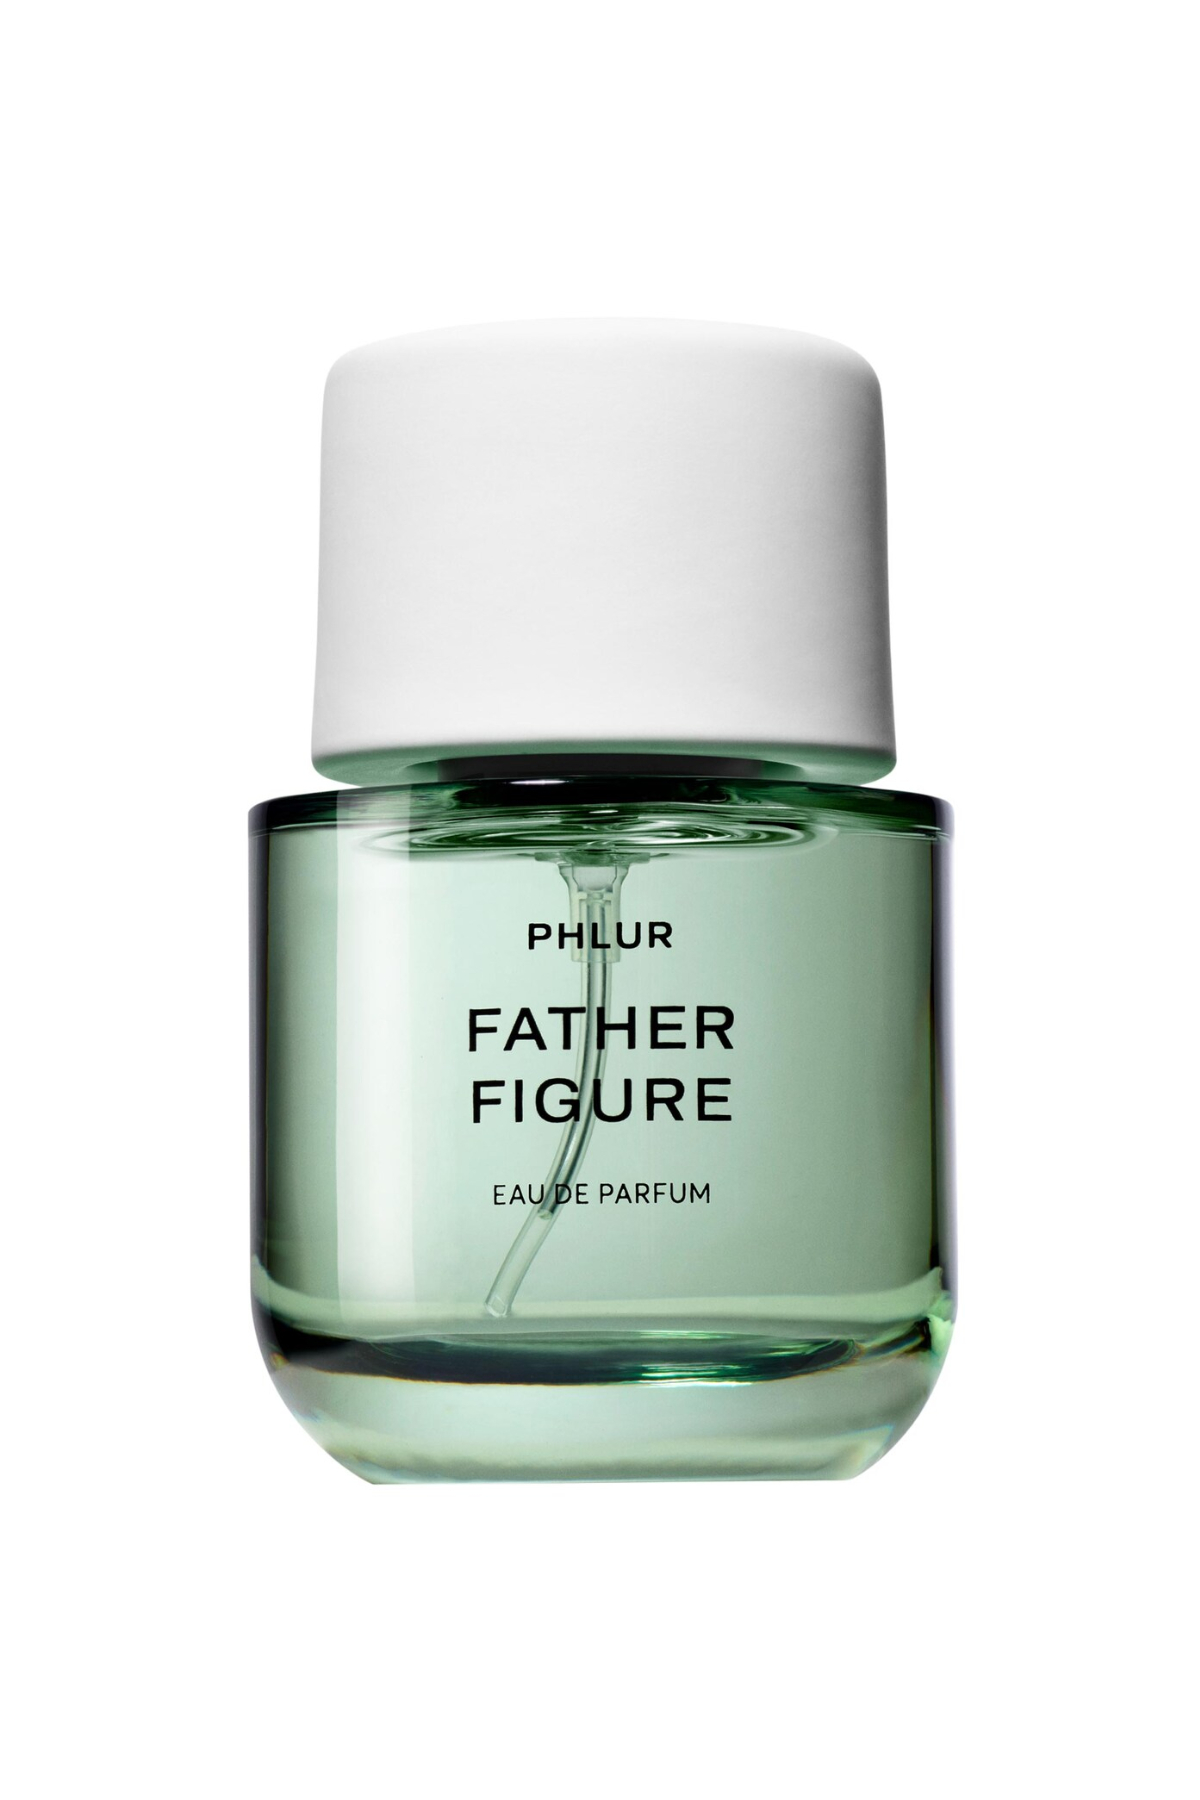 A bottle of PHLUR Father Figure perfume against a white background.